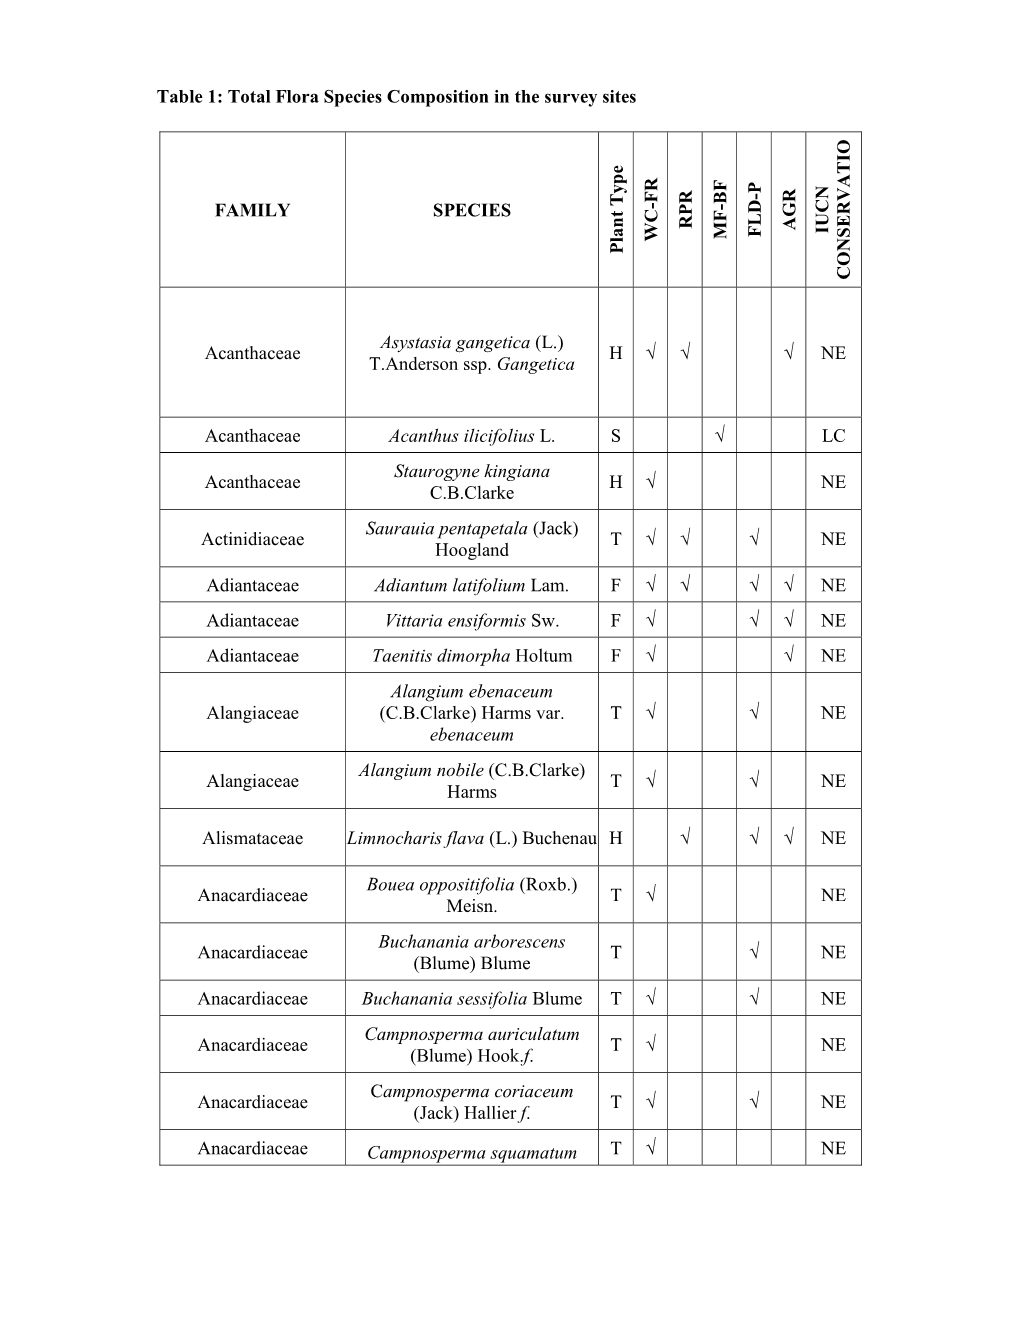 Table 1: Total Flora Species Composition in the Survey Sites